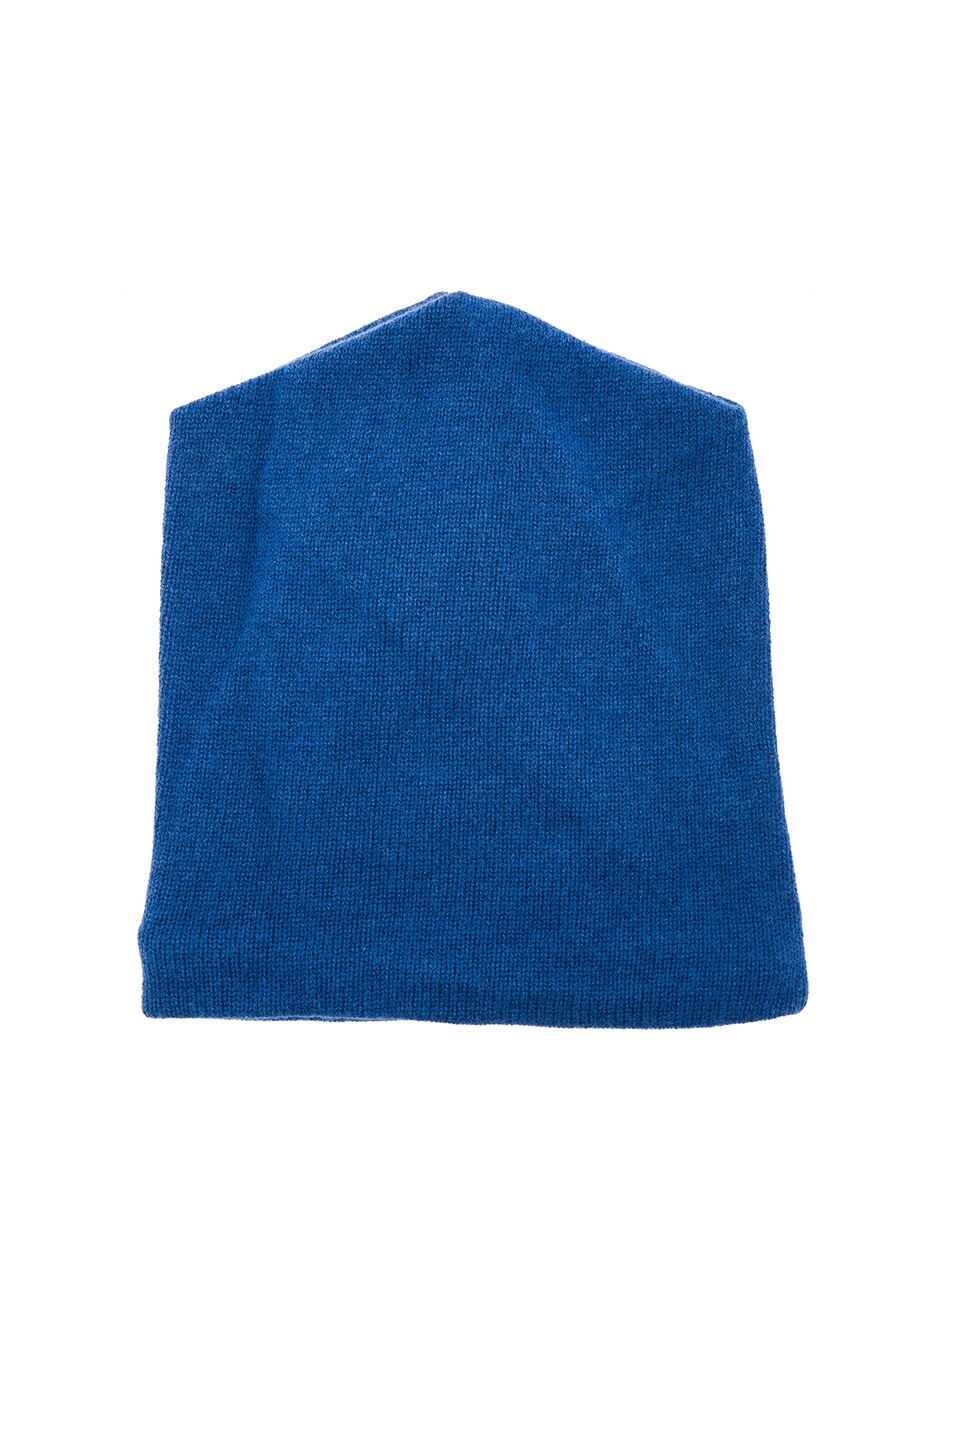 Image 1 of Michelle Mason Wool Cashmere Beanie in Peacock